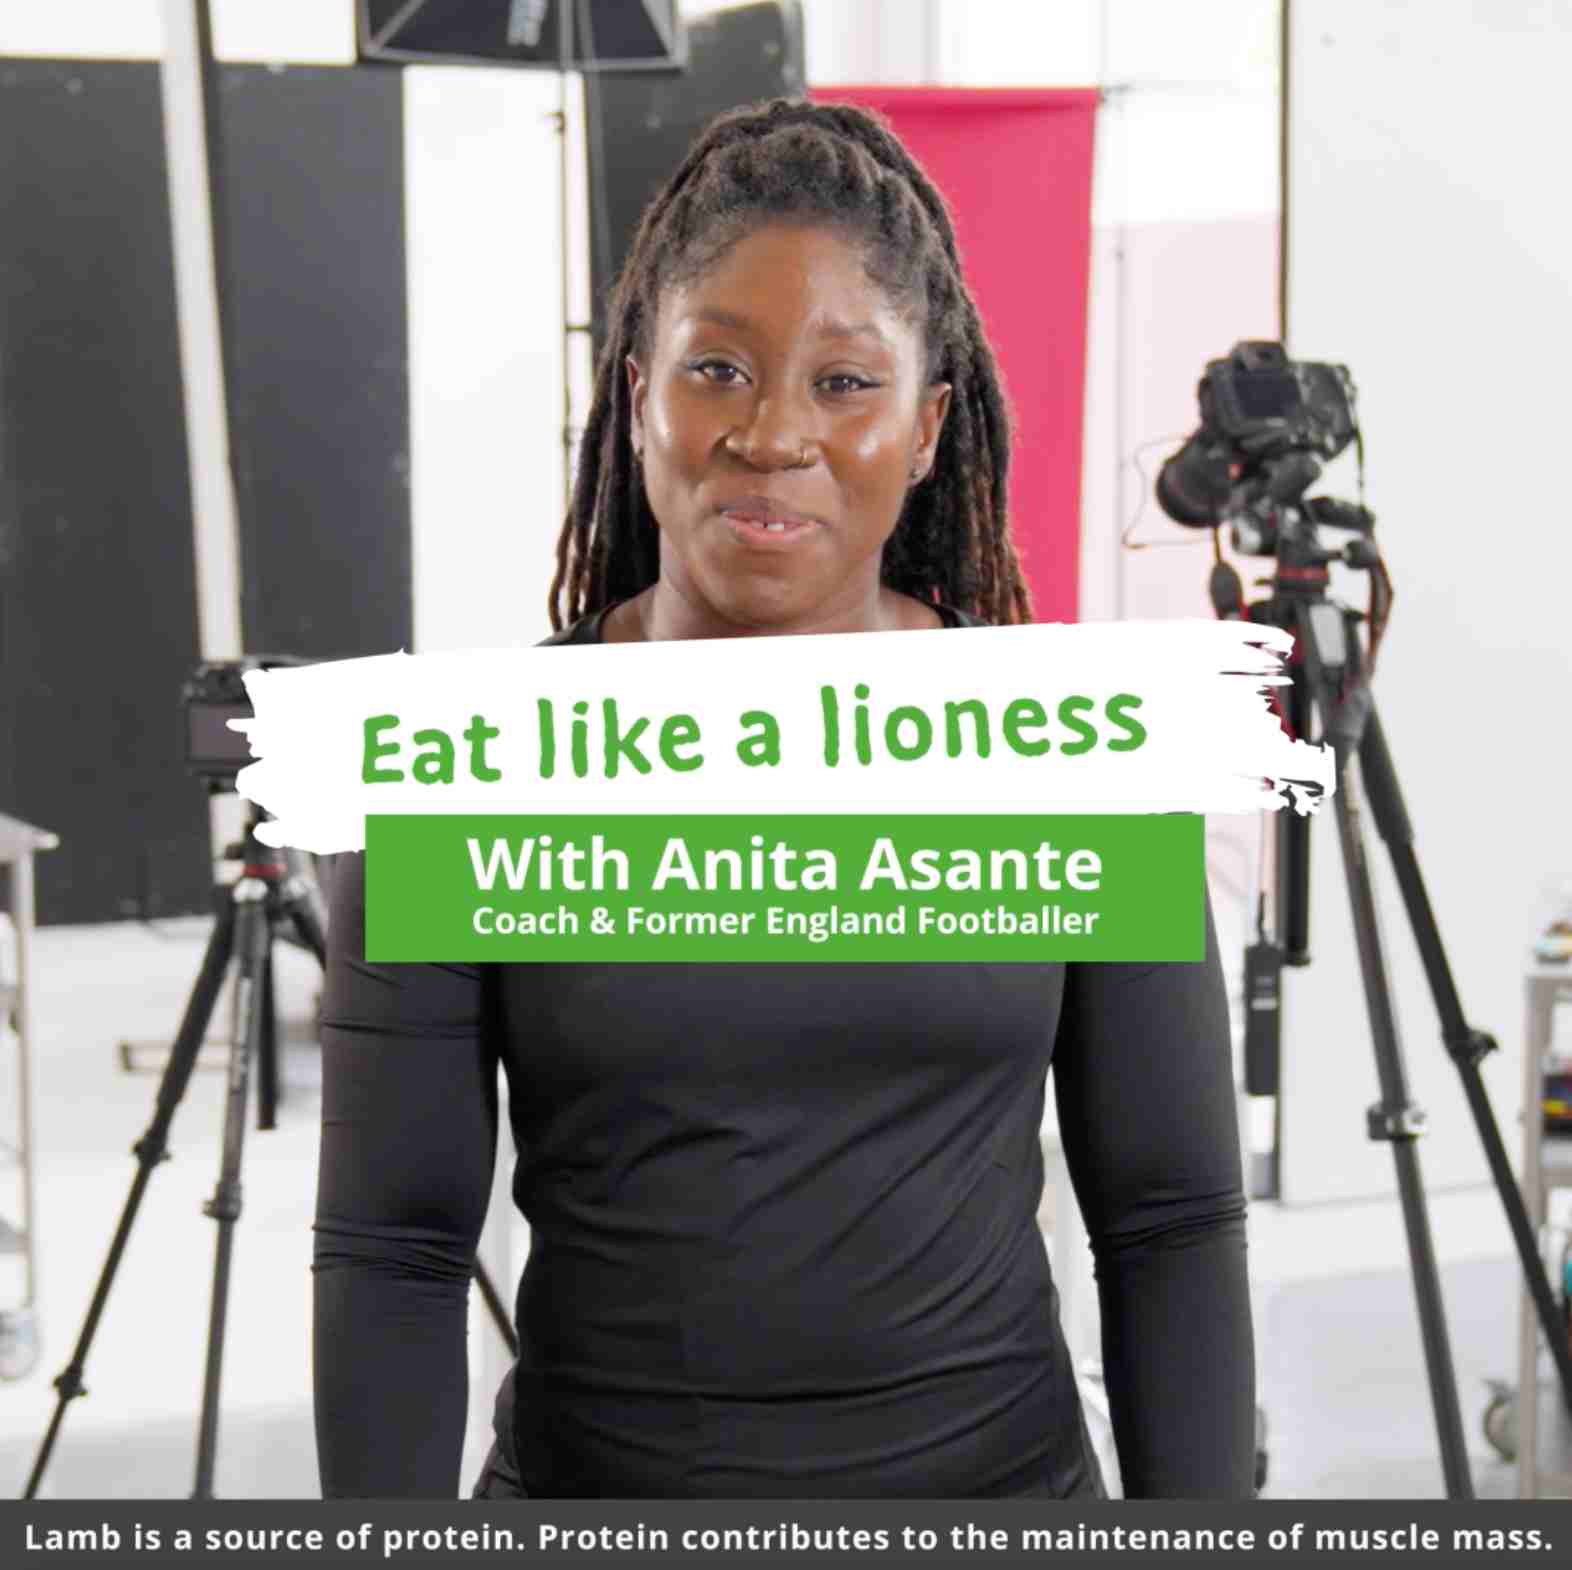 Anita Asante eat like a lioness campaign social media front frame